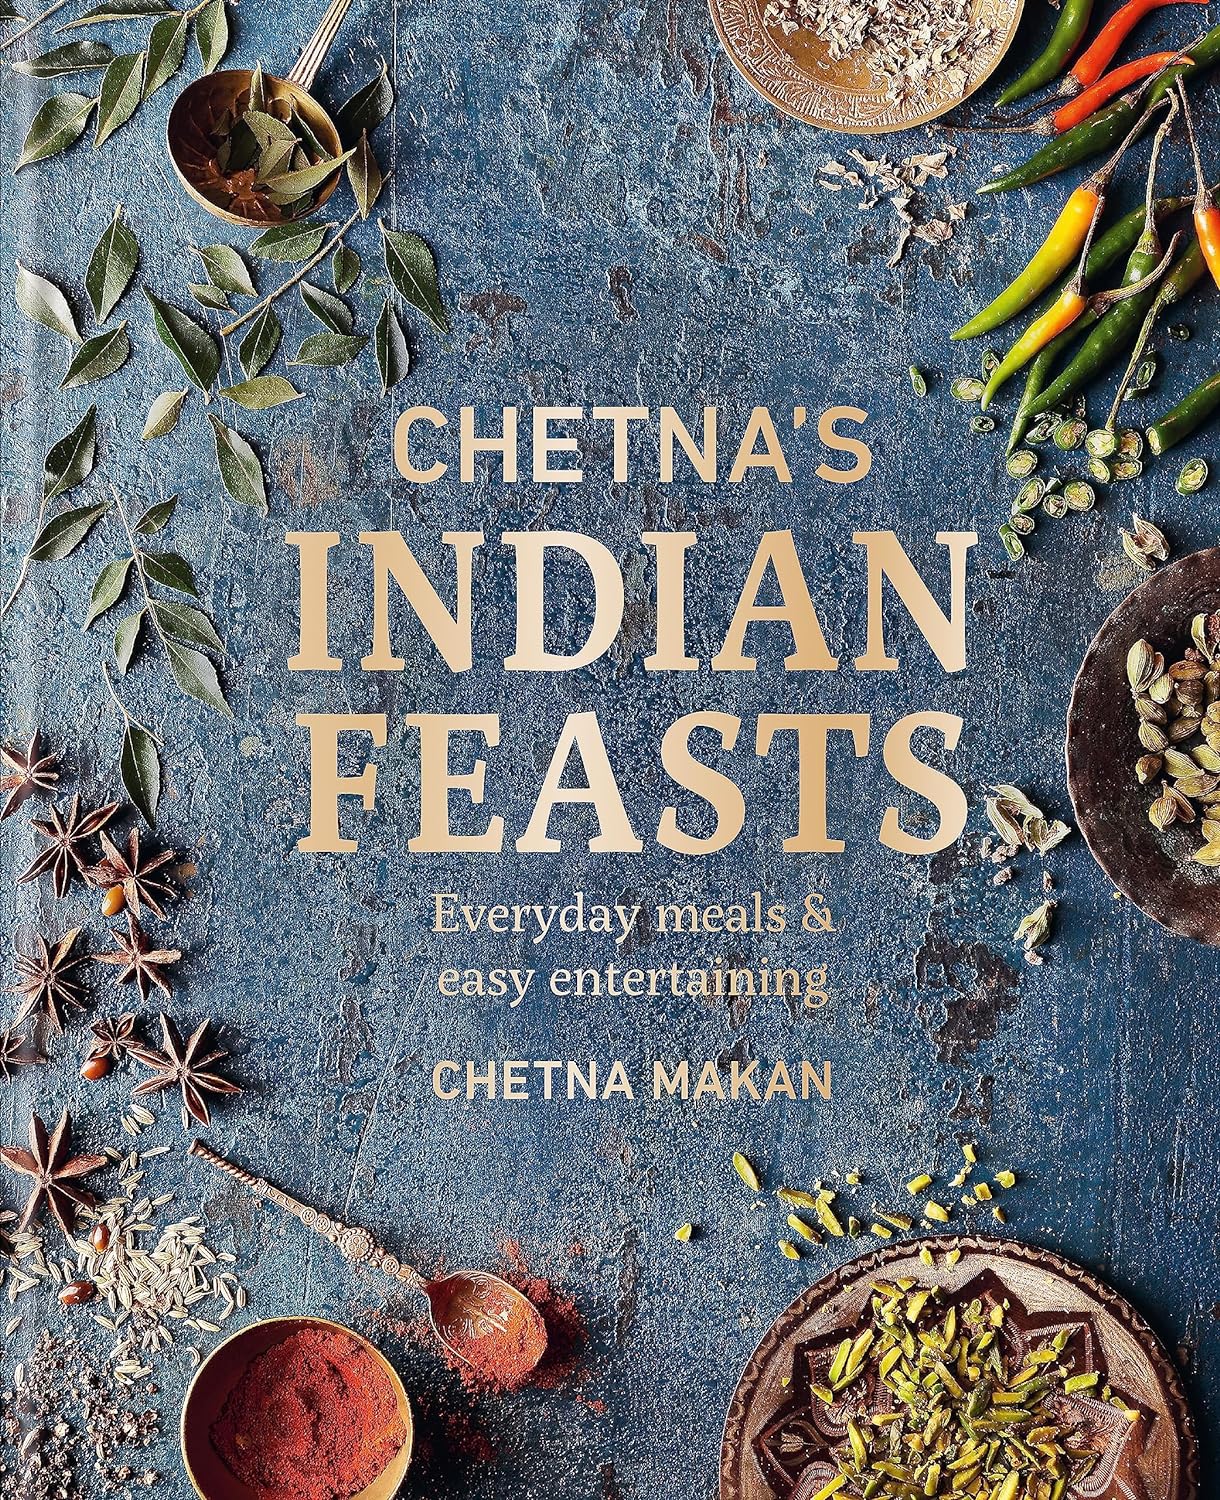 Chetna's Indian Feasts: Everyday meals and easy entertaining by Chetna Makan